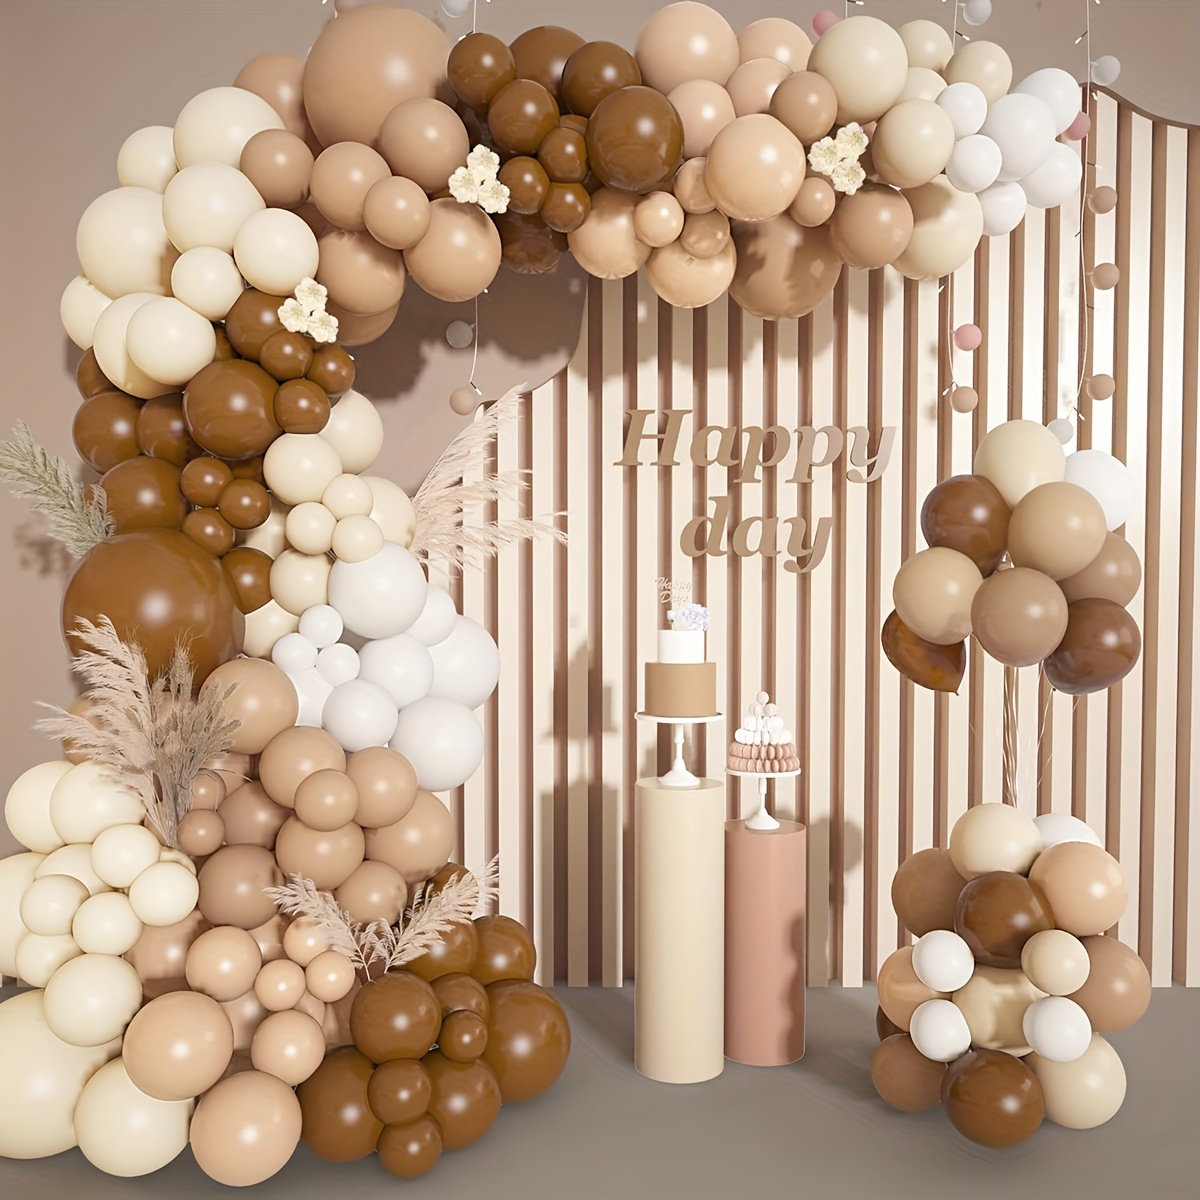 

146-piece Latex Balloon Set In Brown, White & Nude - Perfect For Weddings, Birthdays, Graduations, Anniversaries & More - Versatile Home Decor For Any Occasion